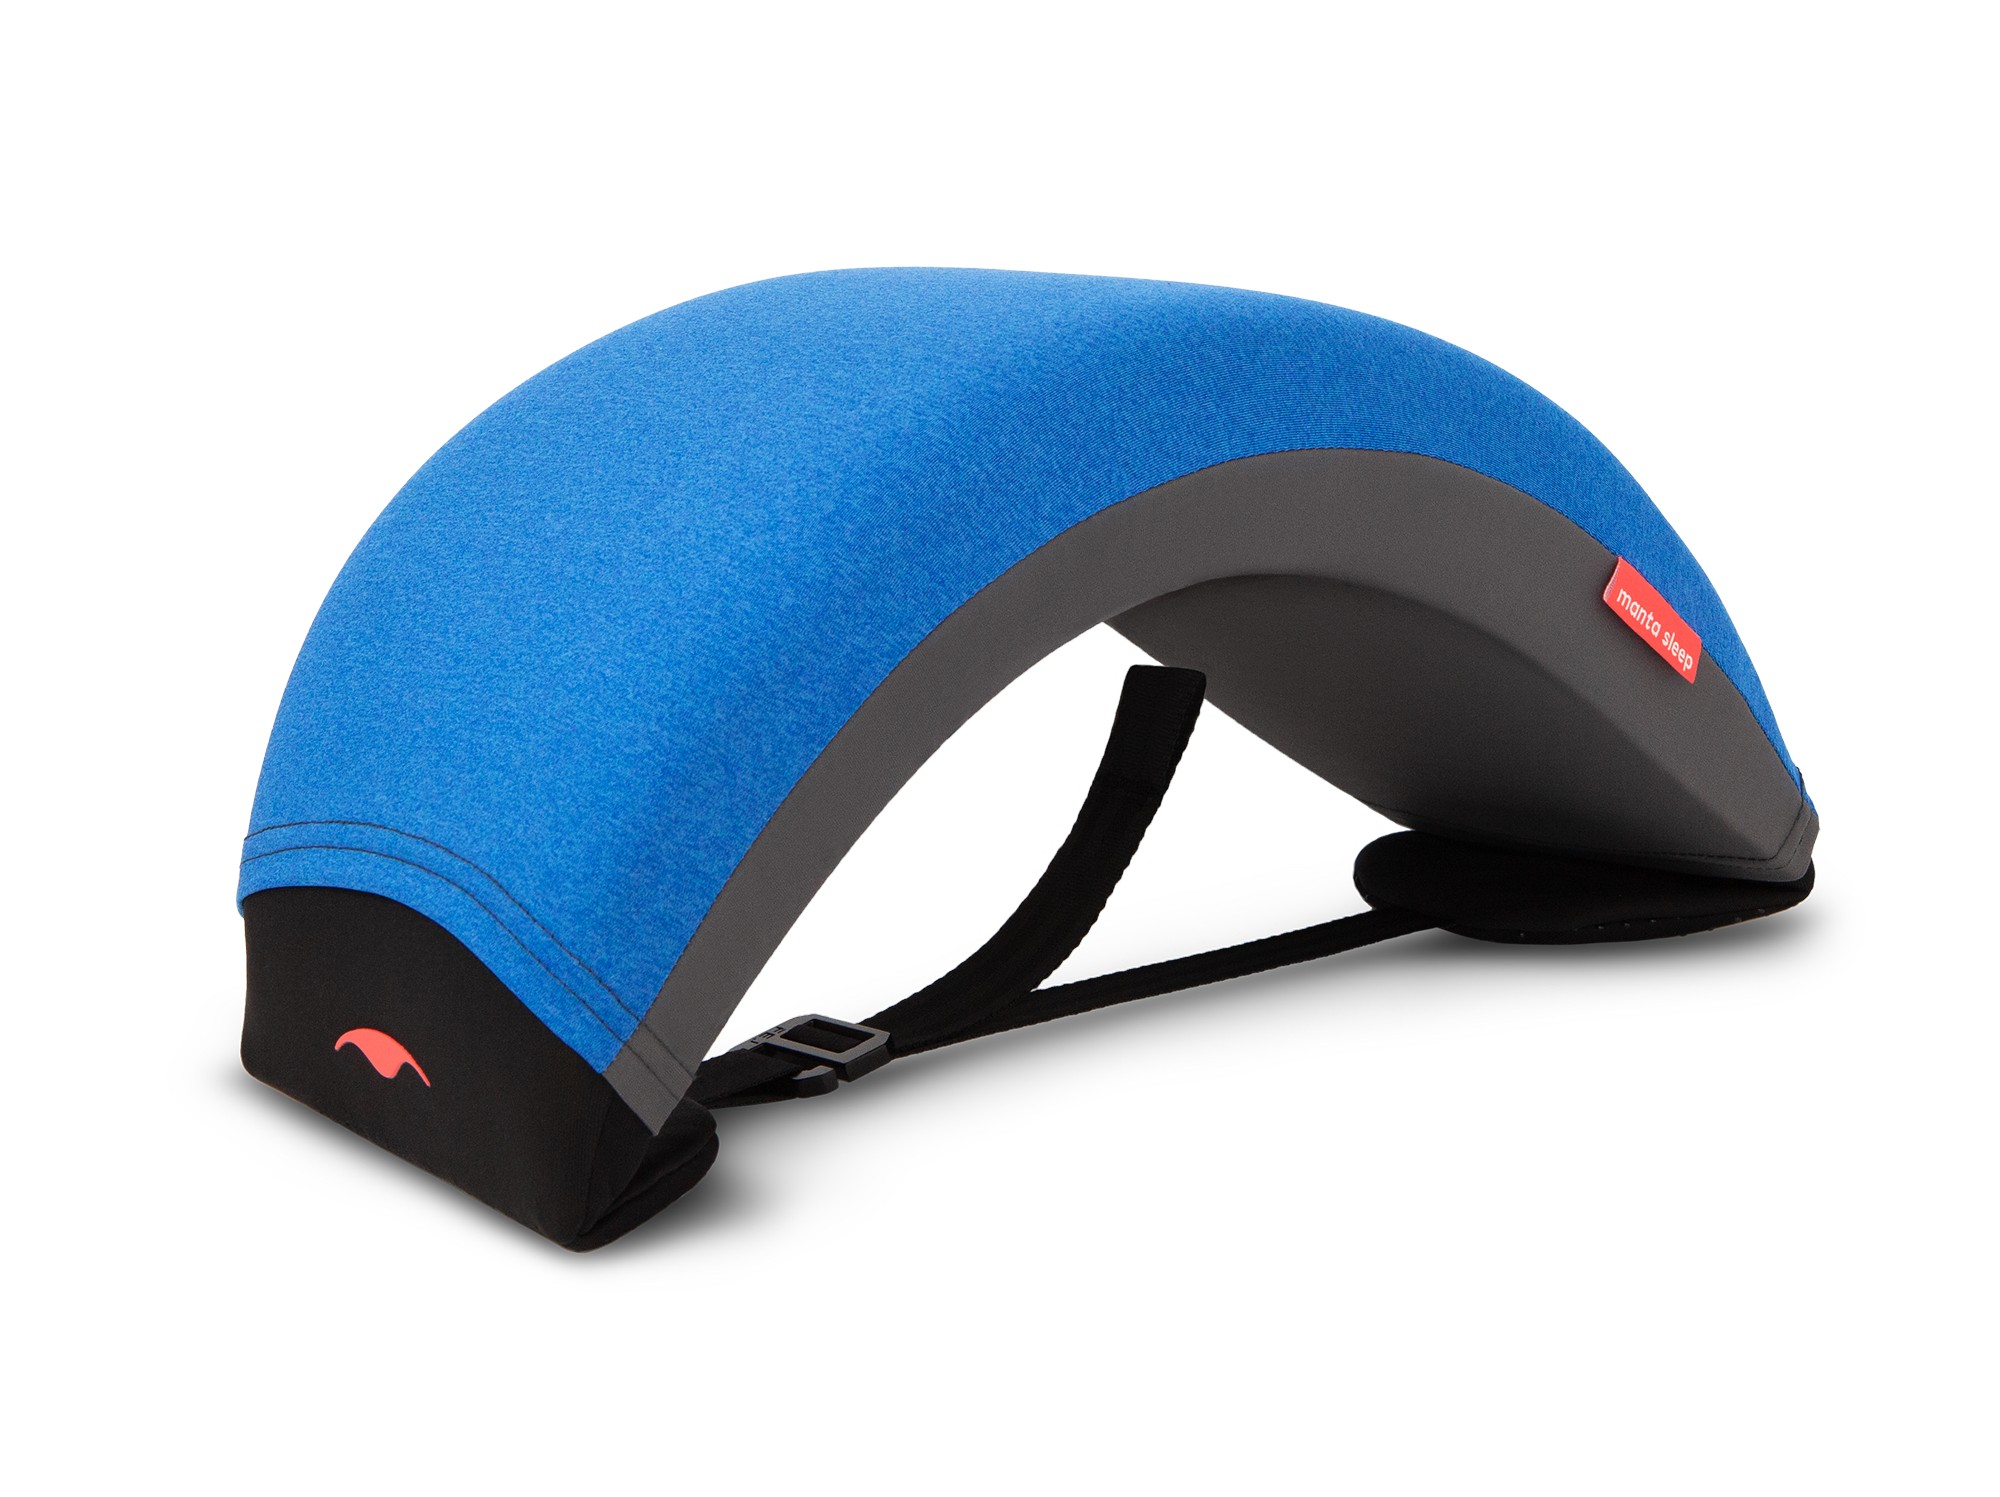 A blue pillow shaped like an arc designed for healthy daily naps.